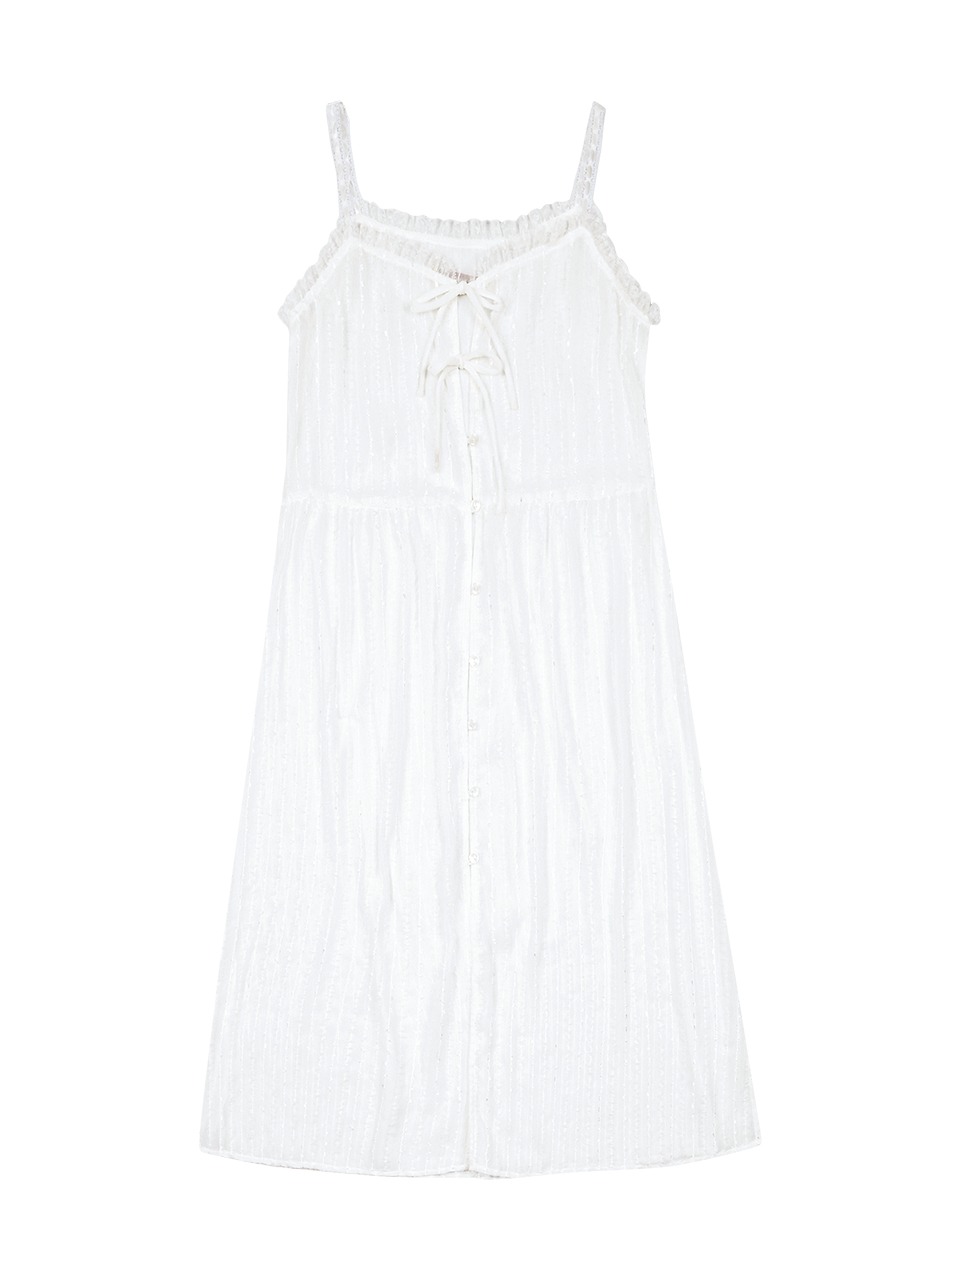 LACE LAYERED ONE-PIECE (WHITE)